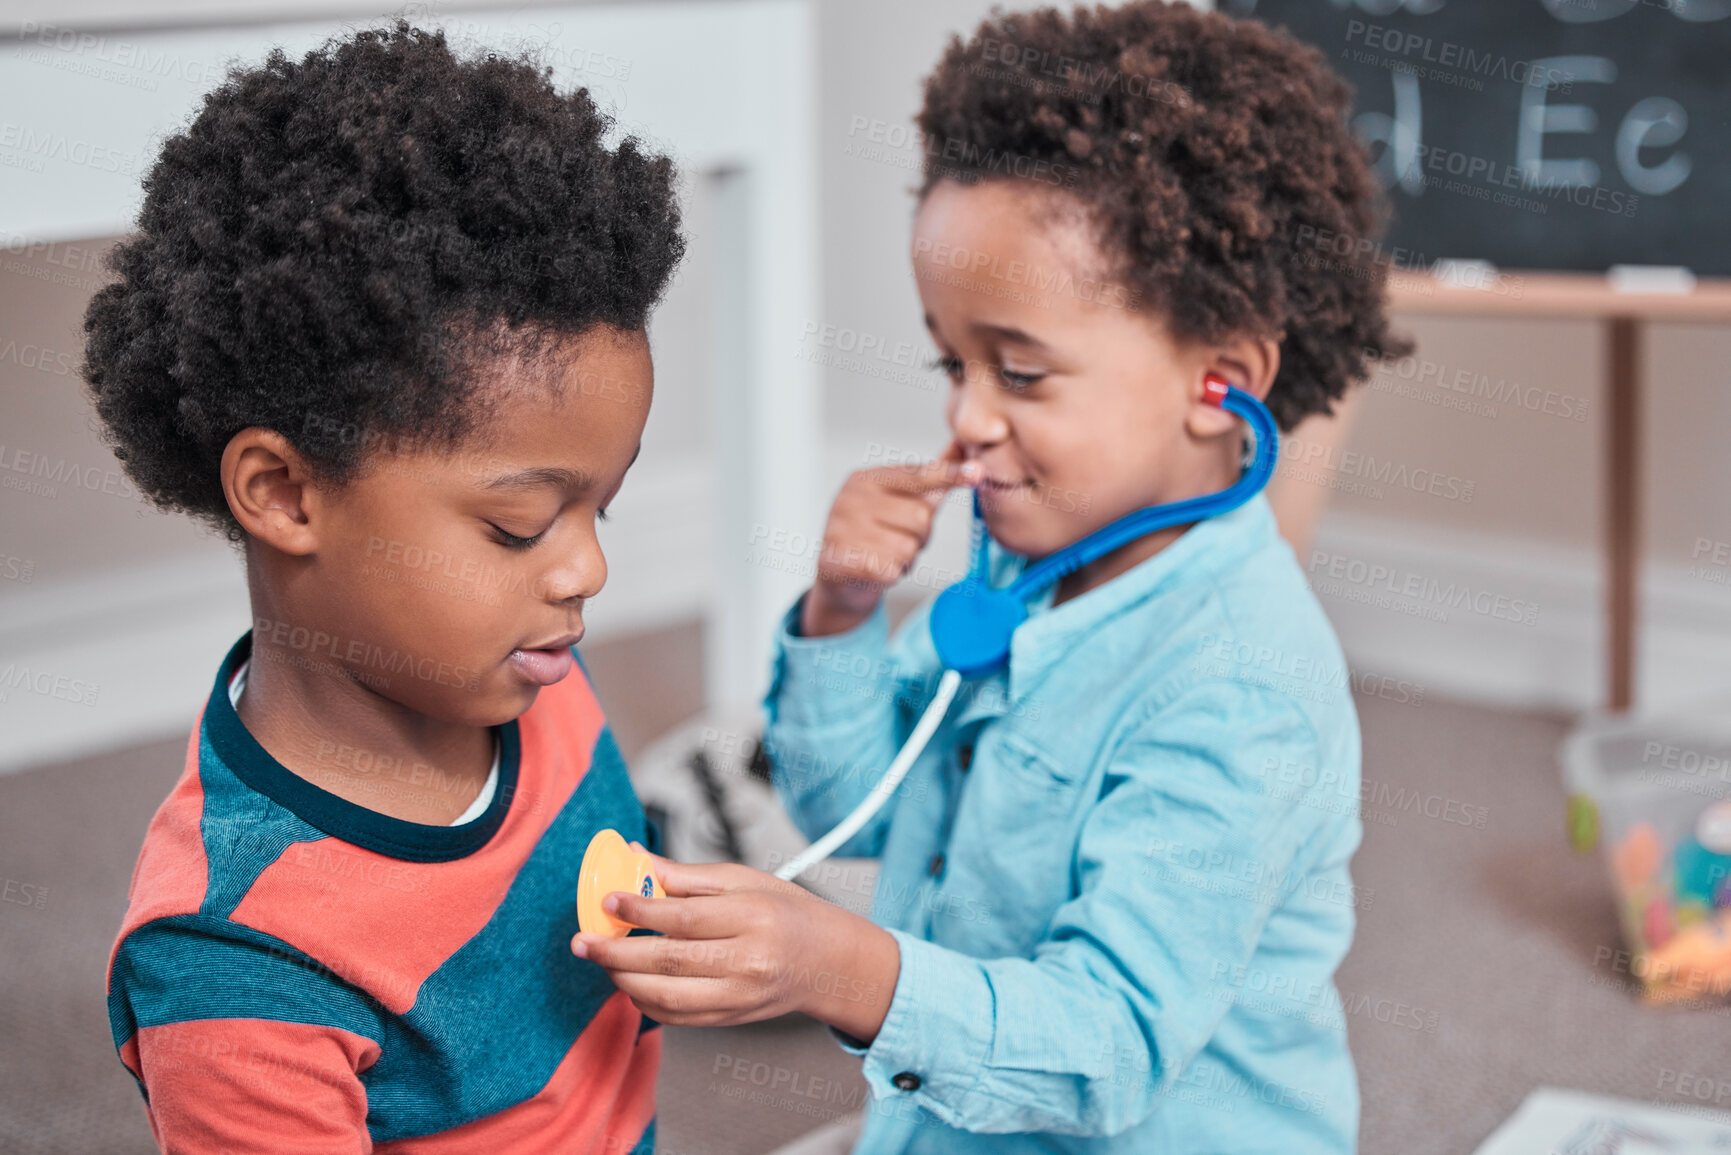 Buy stock photo Shot of a boy using a toy stethoscope on his